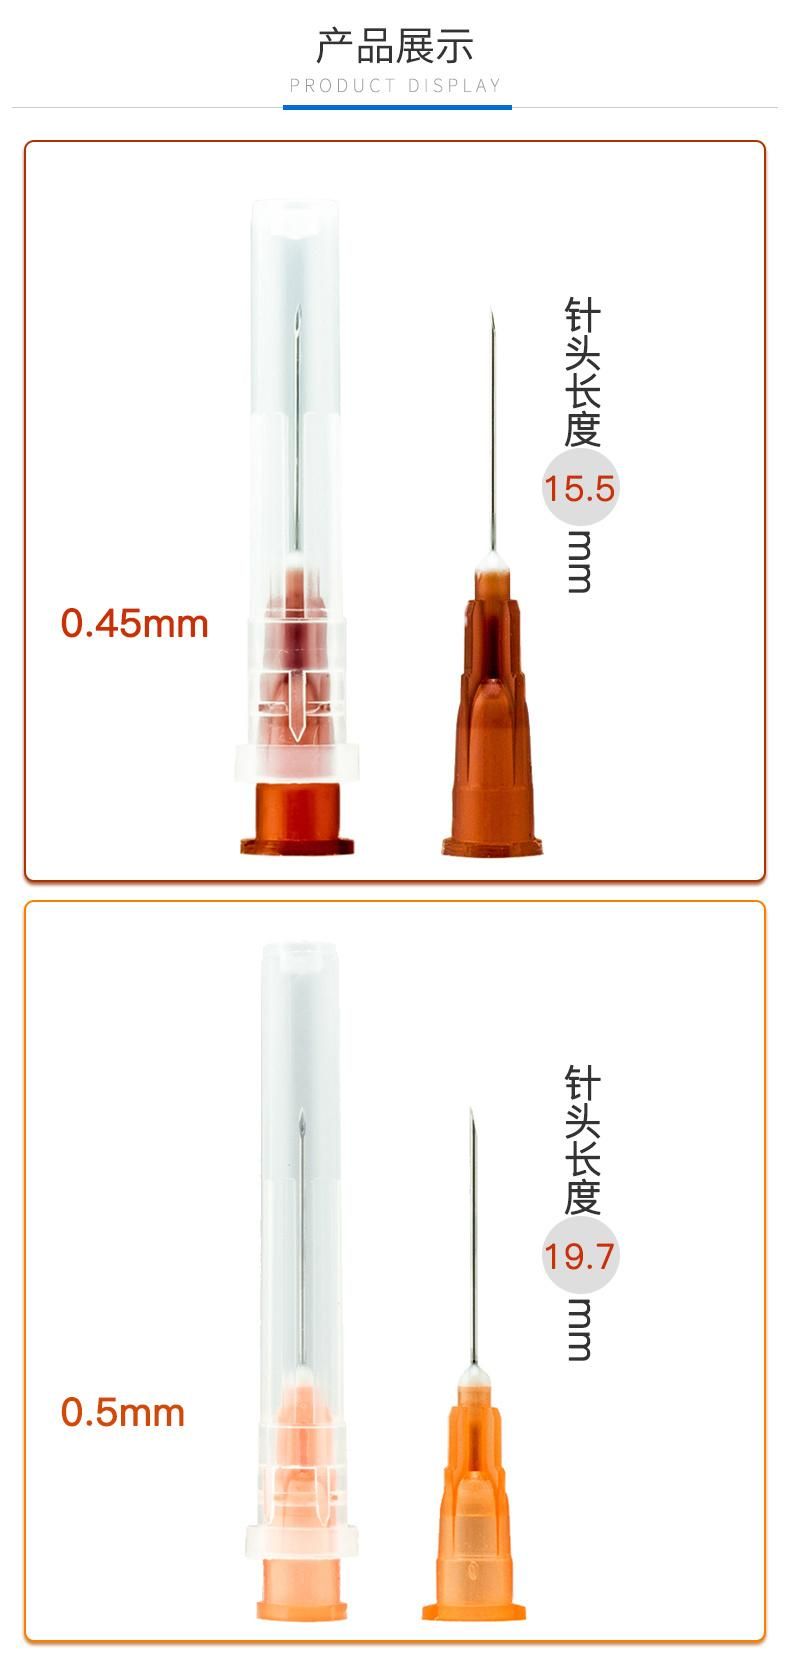 Disposable Medical Sterile Injection Needle 0.5mm*19.7mm Medical Syringe Needle Needle Device